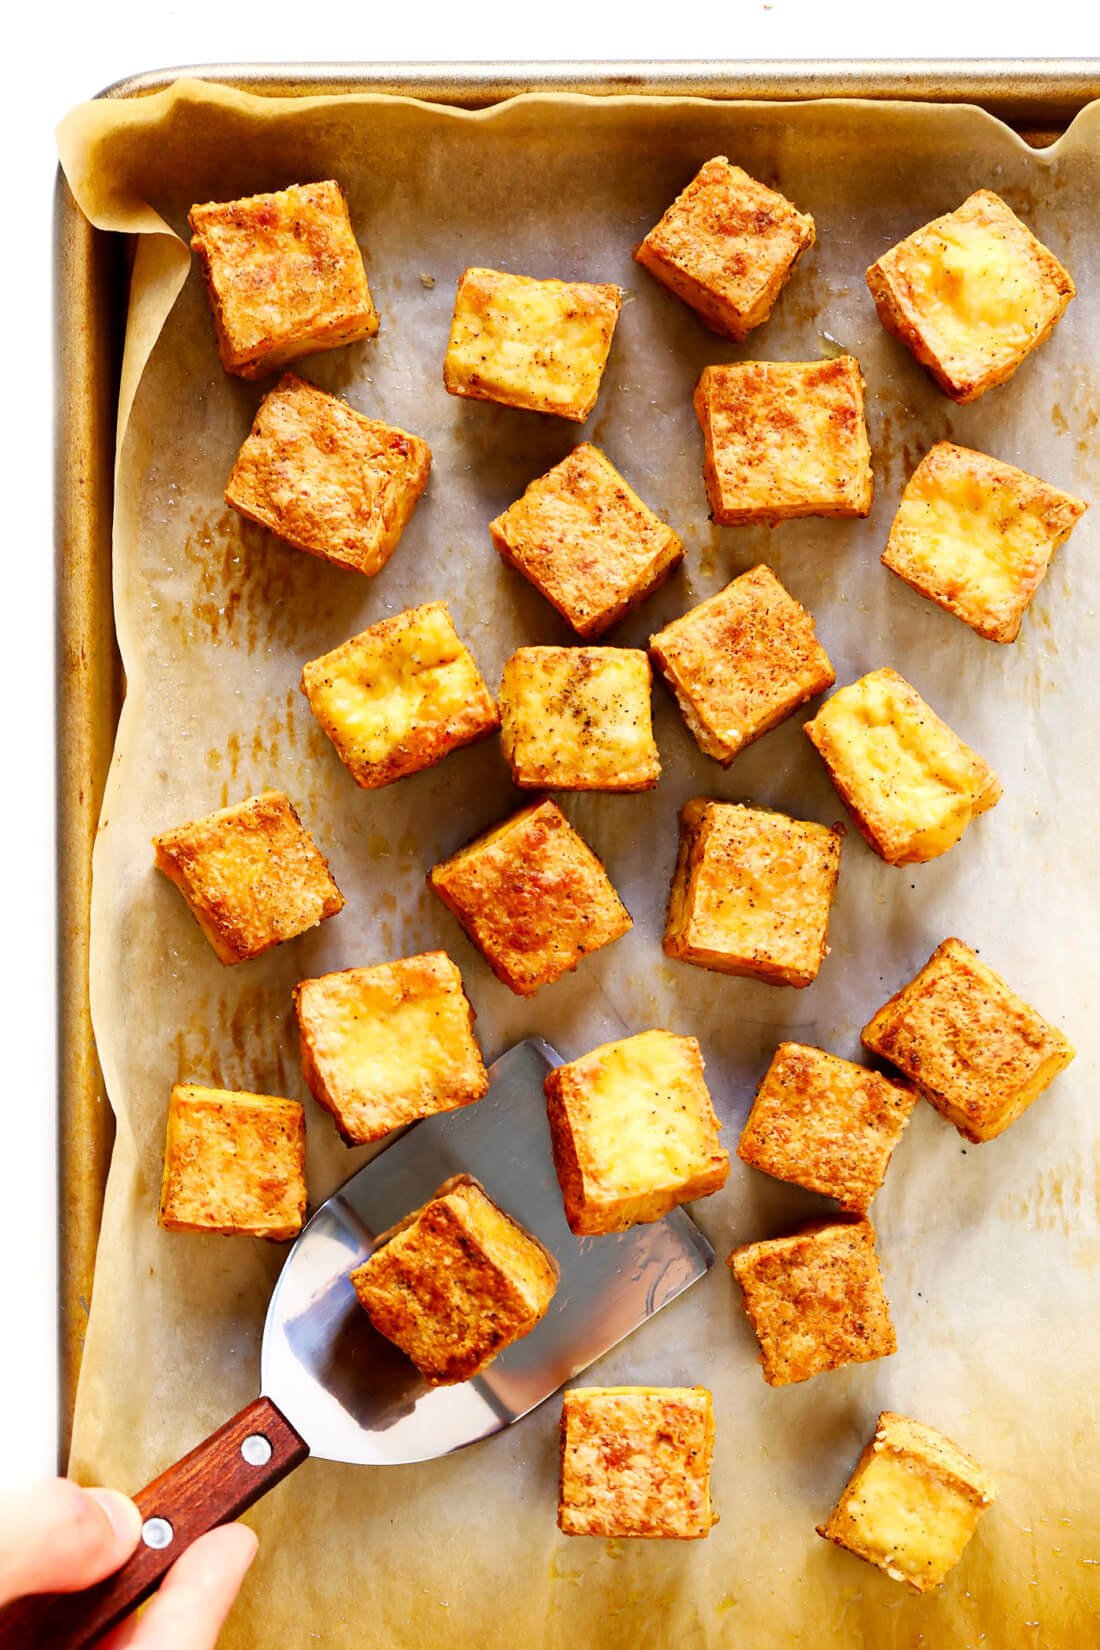 How To Make Baked Tofu | Gimme Some Oven